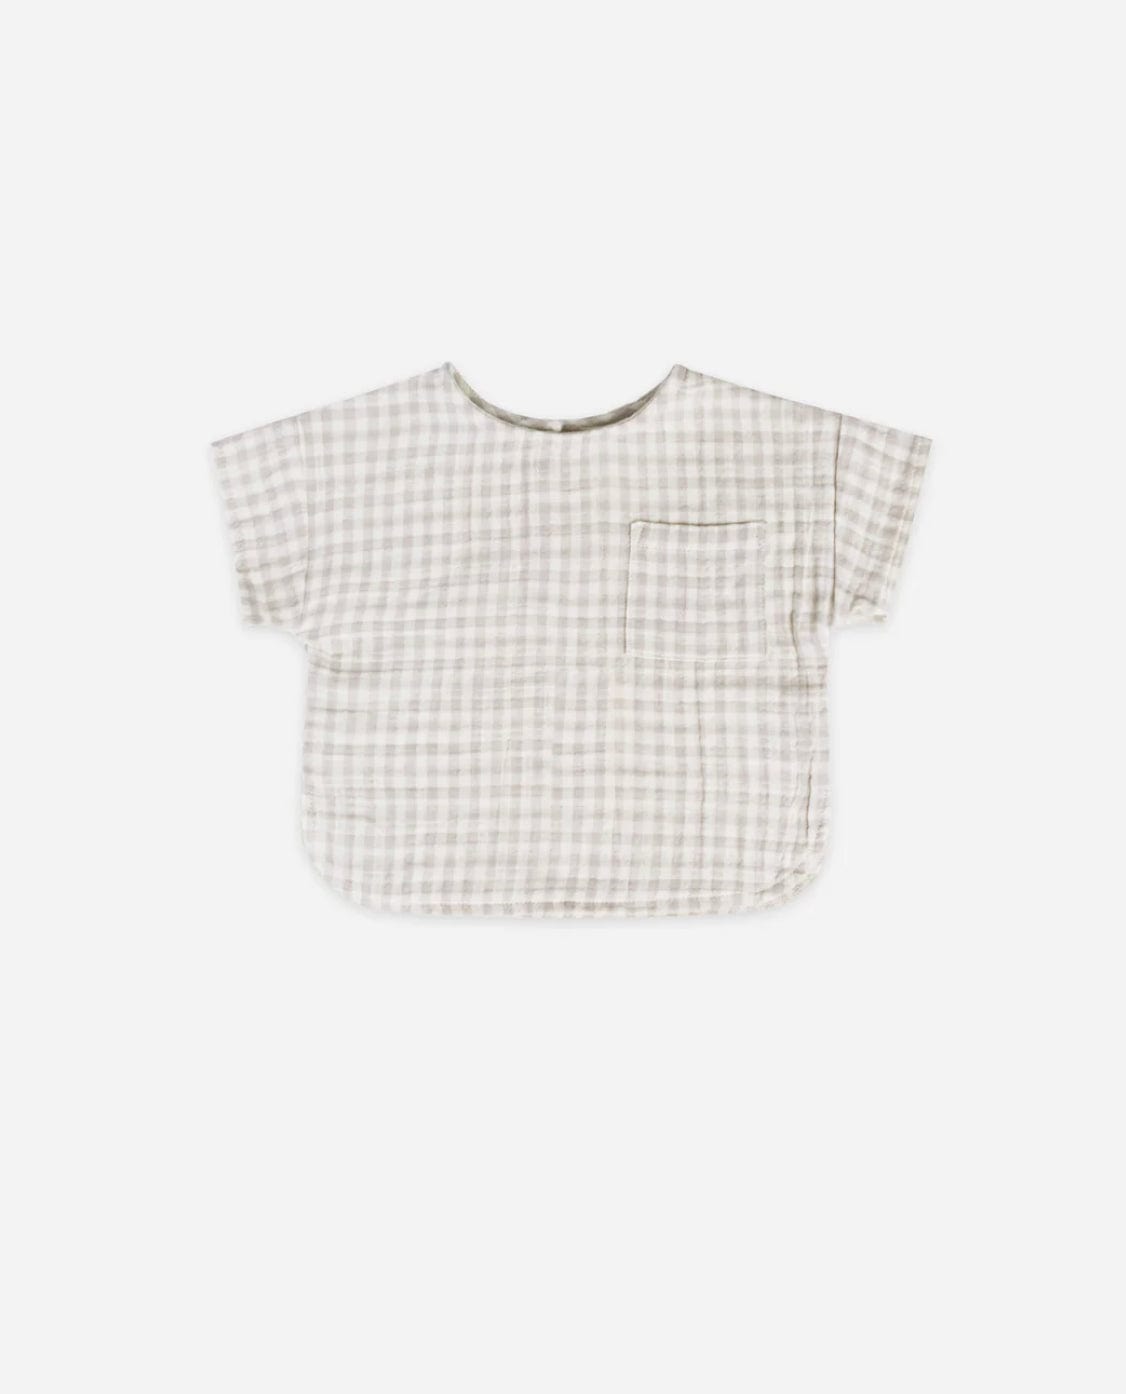 Little Beach Babes Boutique  Quincy Mae-SS23-woven boxy top | silver gingham